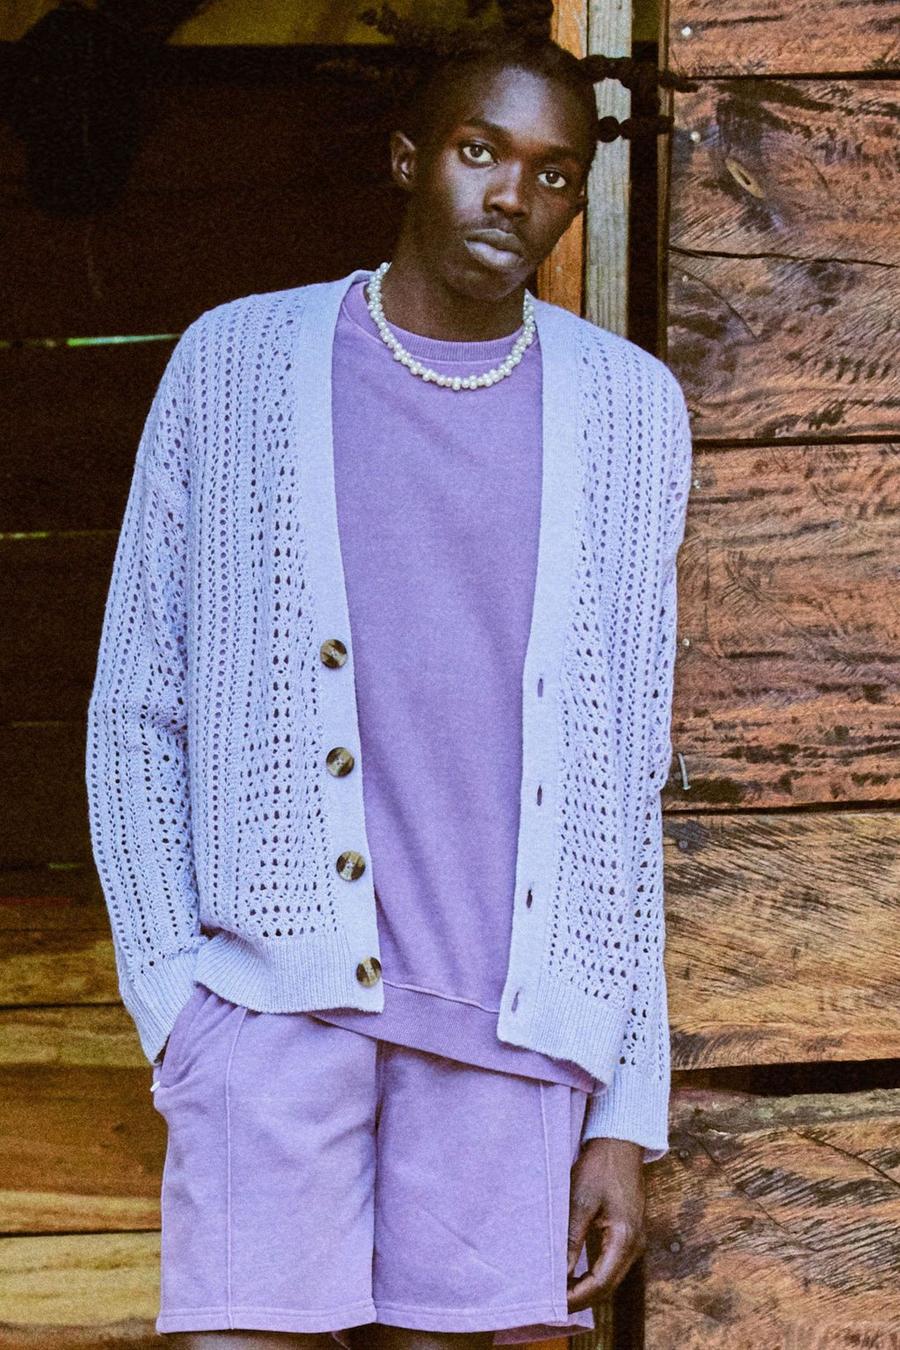 Lilac viola Knitted Dropped Shoulder Boxy Texture Cardigan